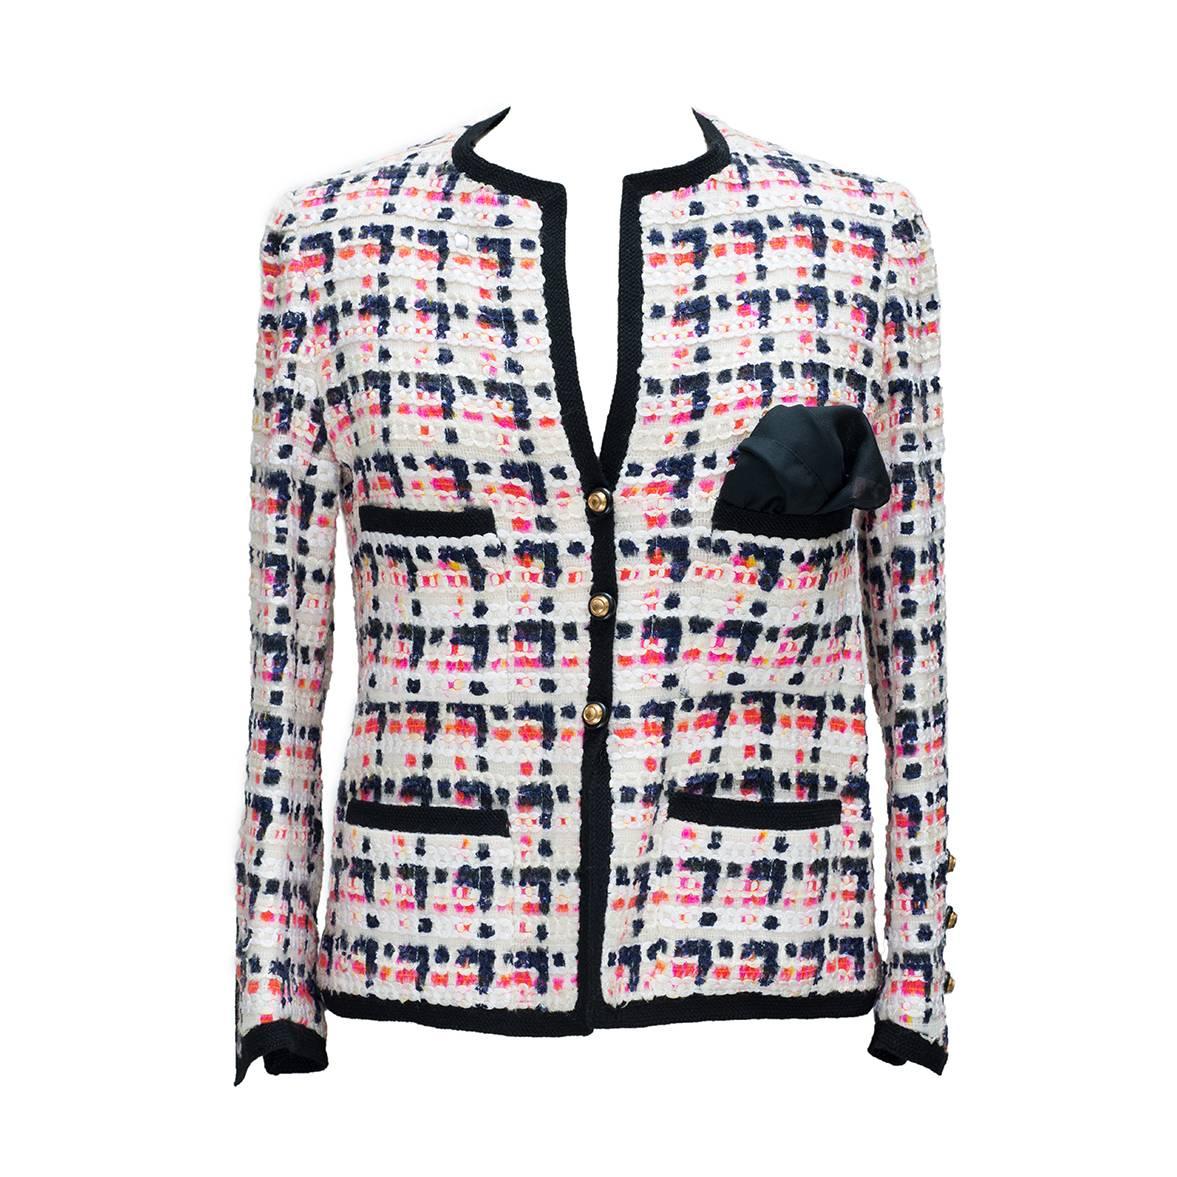 Chanel Haute-Couture  Documented 1960 -1970 Vintage Tweed Multicolor Suit  
Divine collarless jacket edge to edge, 4 pockets , closed with 2 buttons .
The sleeves have 3 buttons on the wrist .
The straight skirt forming a fake effect wallet .